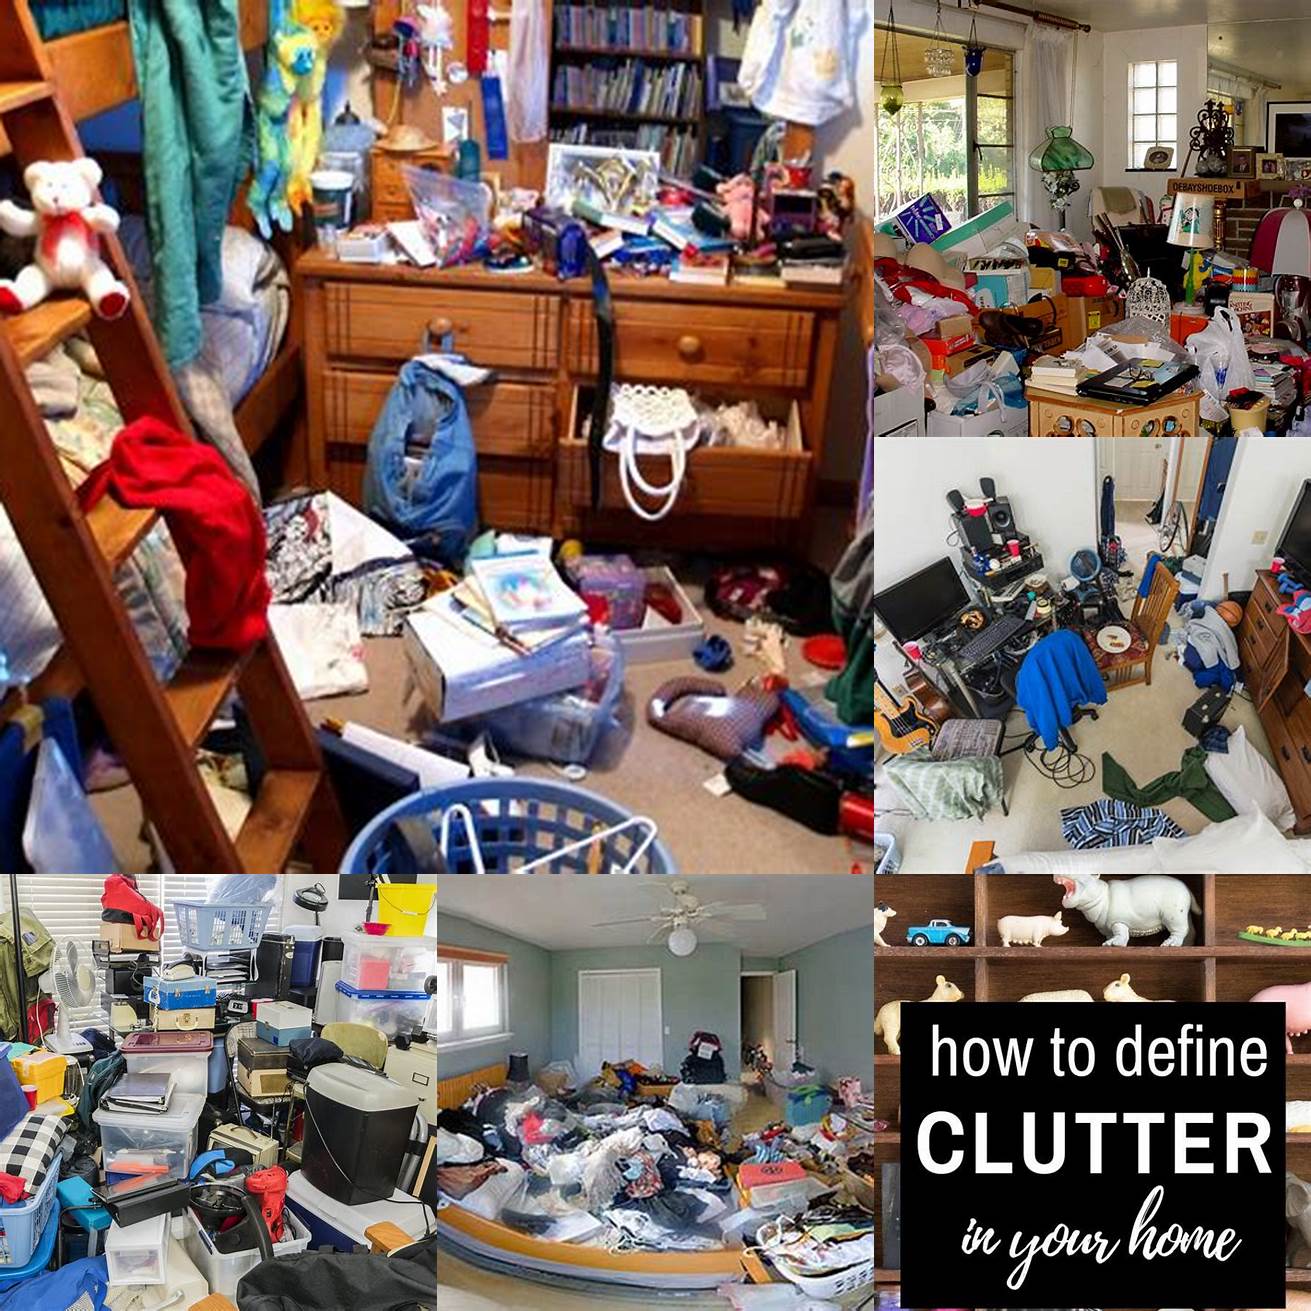 May result in clutter and confusion